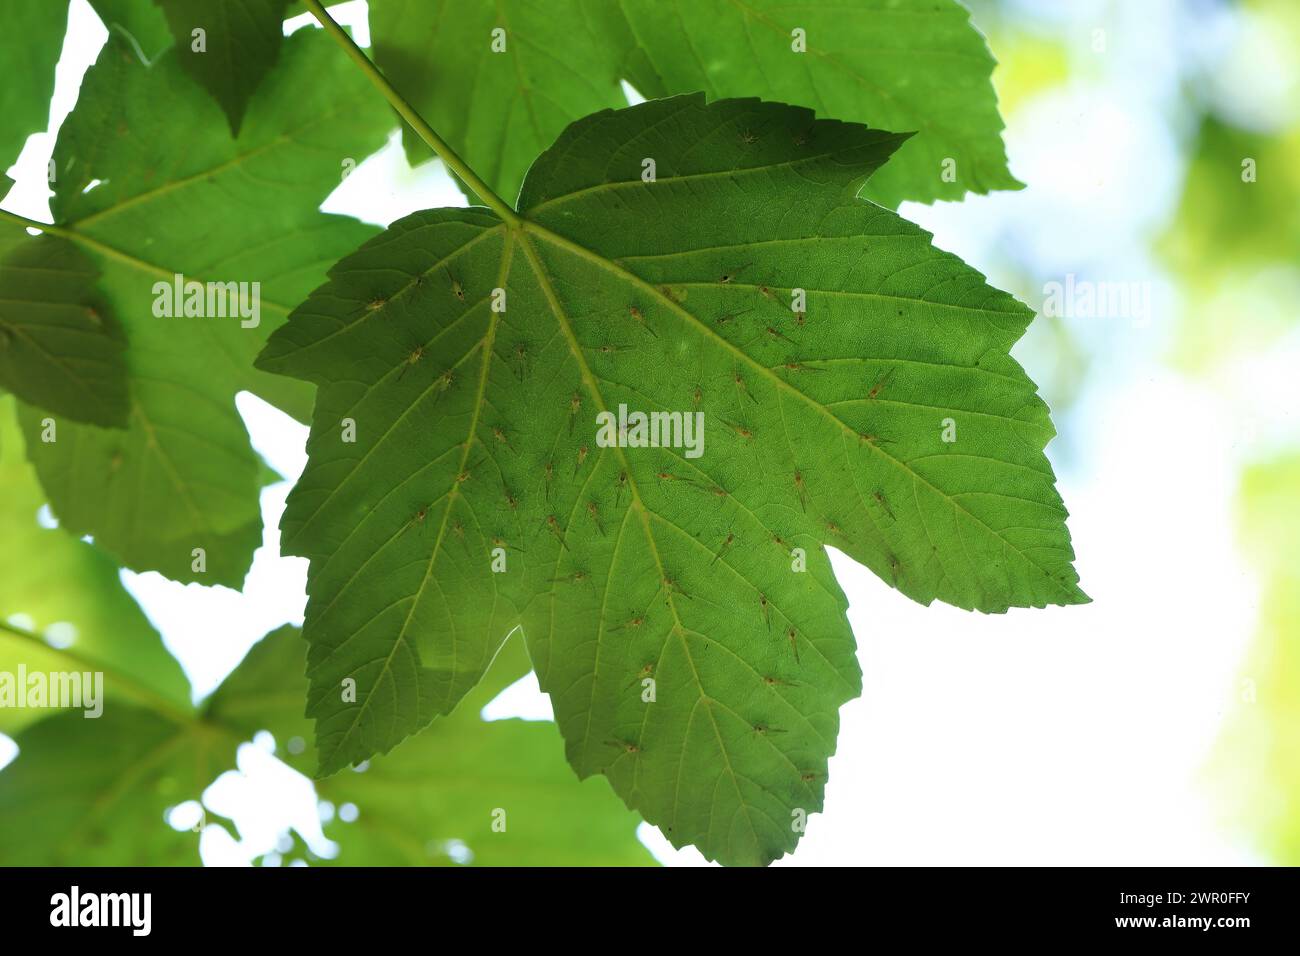 Numerous winged aphids on the underside of a maple leaf. Stock Photo